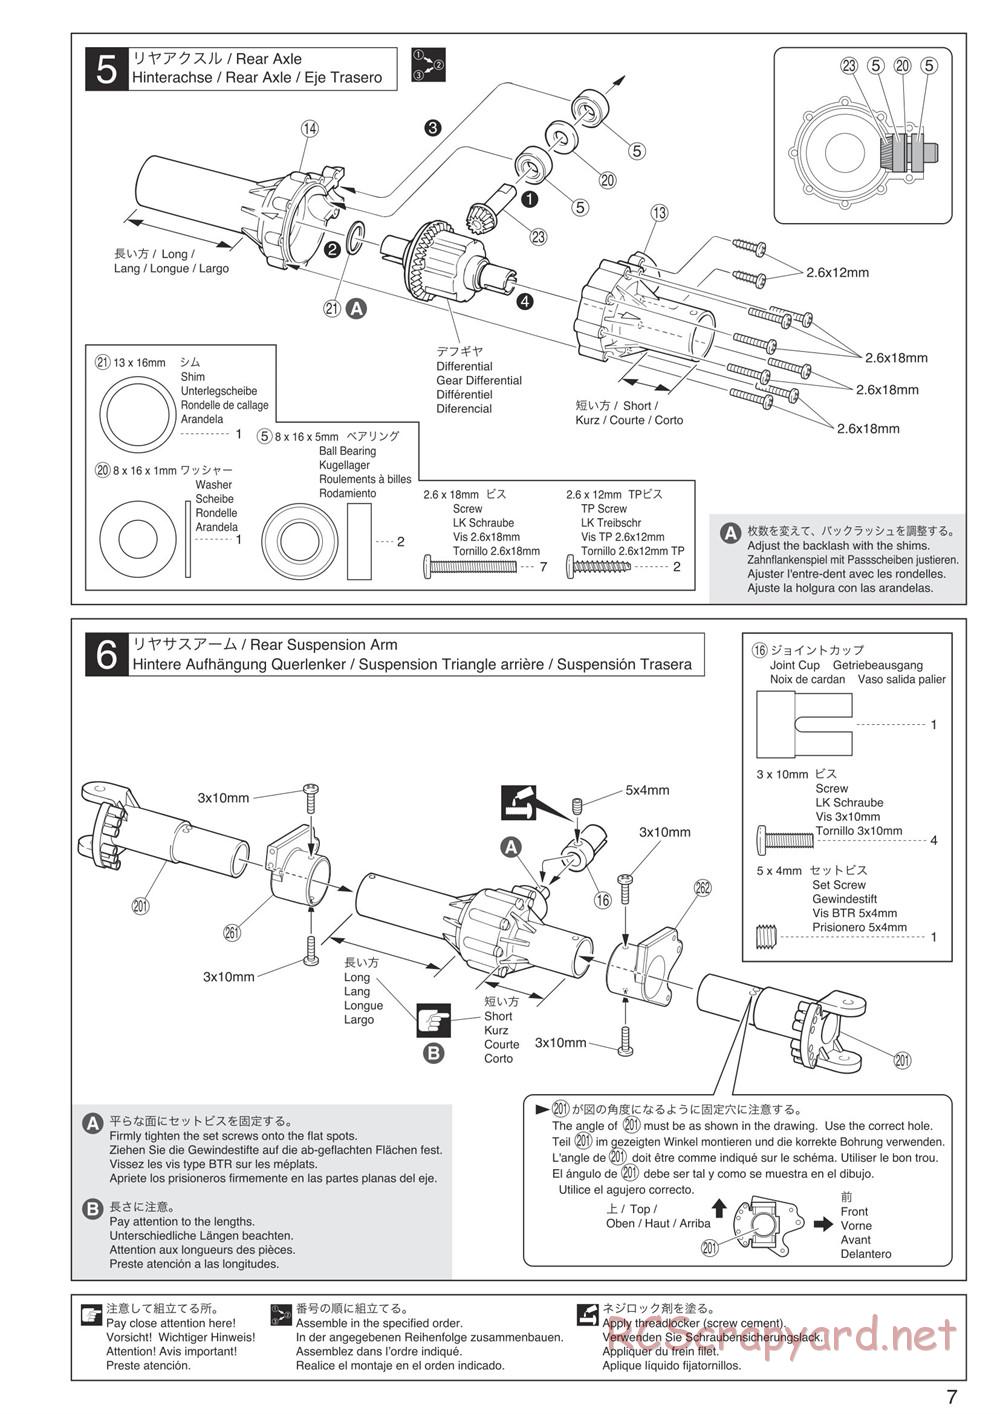 Kyosho - FO-XX VE 2.0 - Manual - Page 7